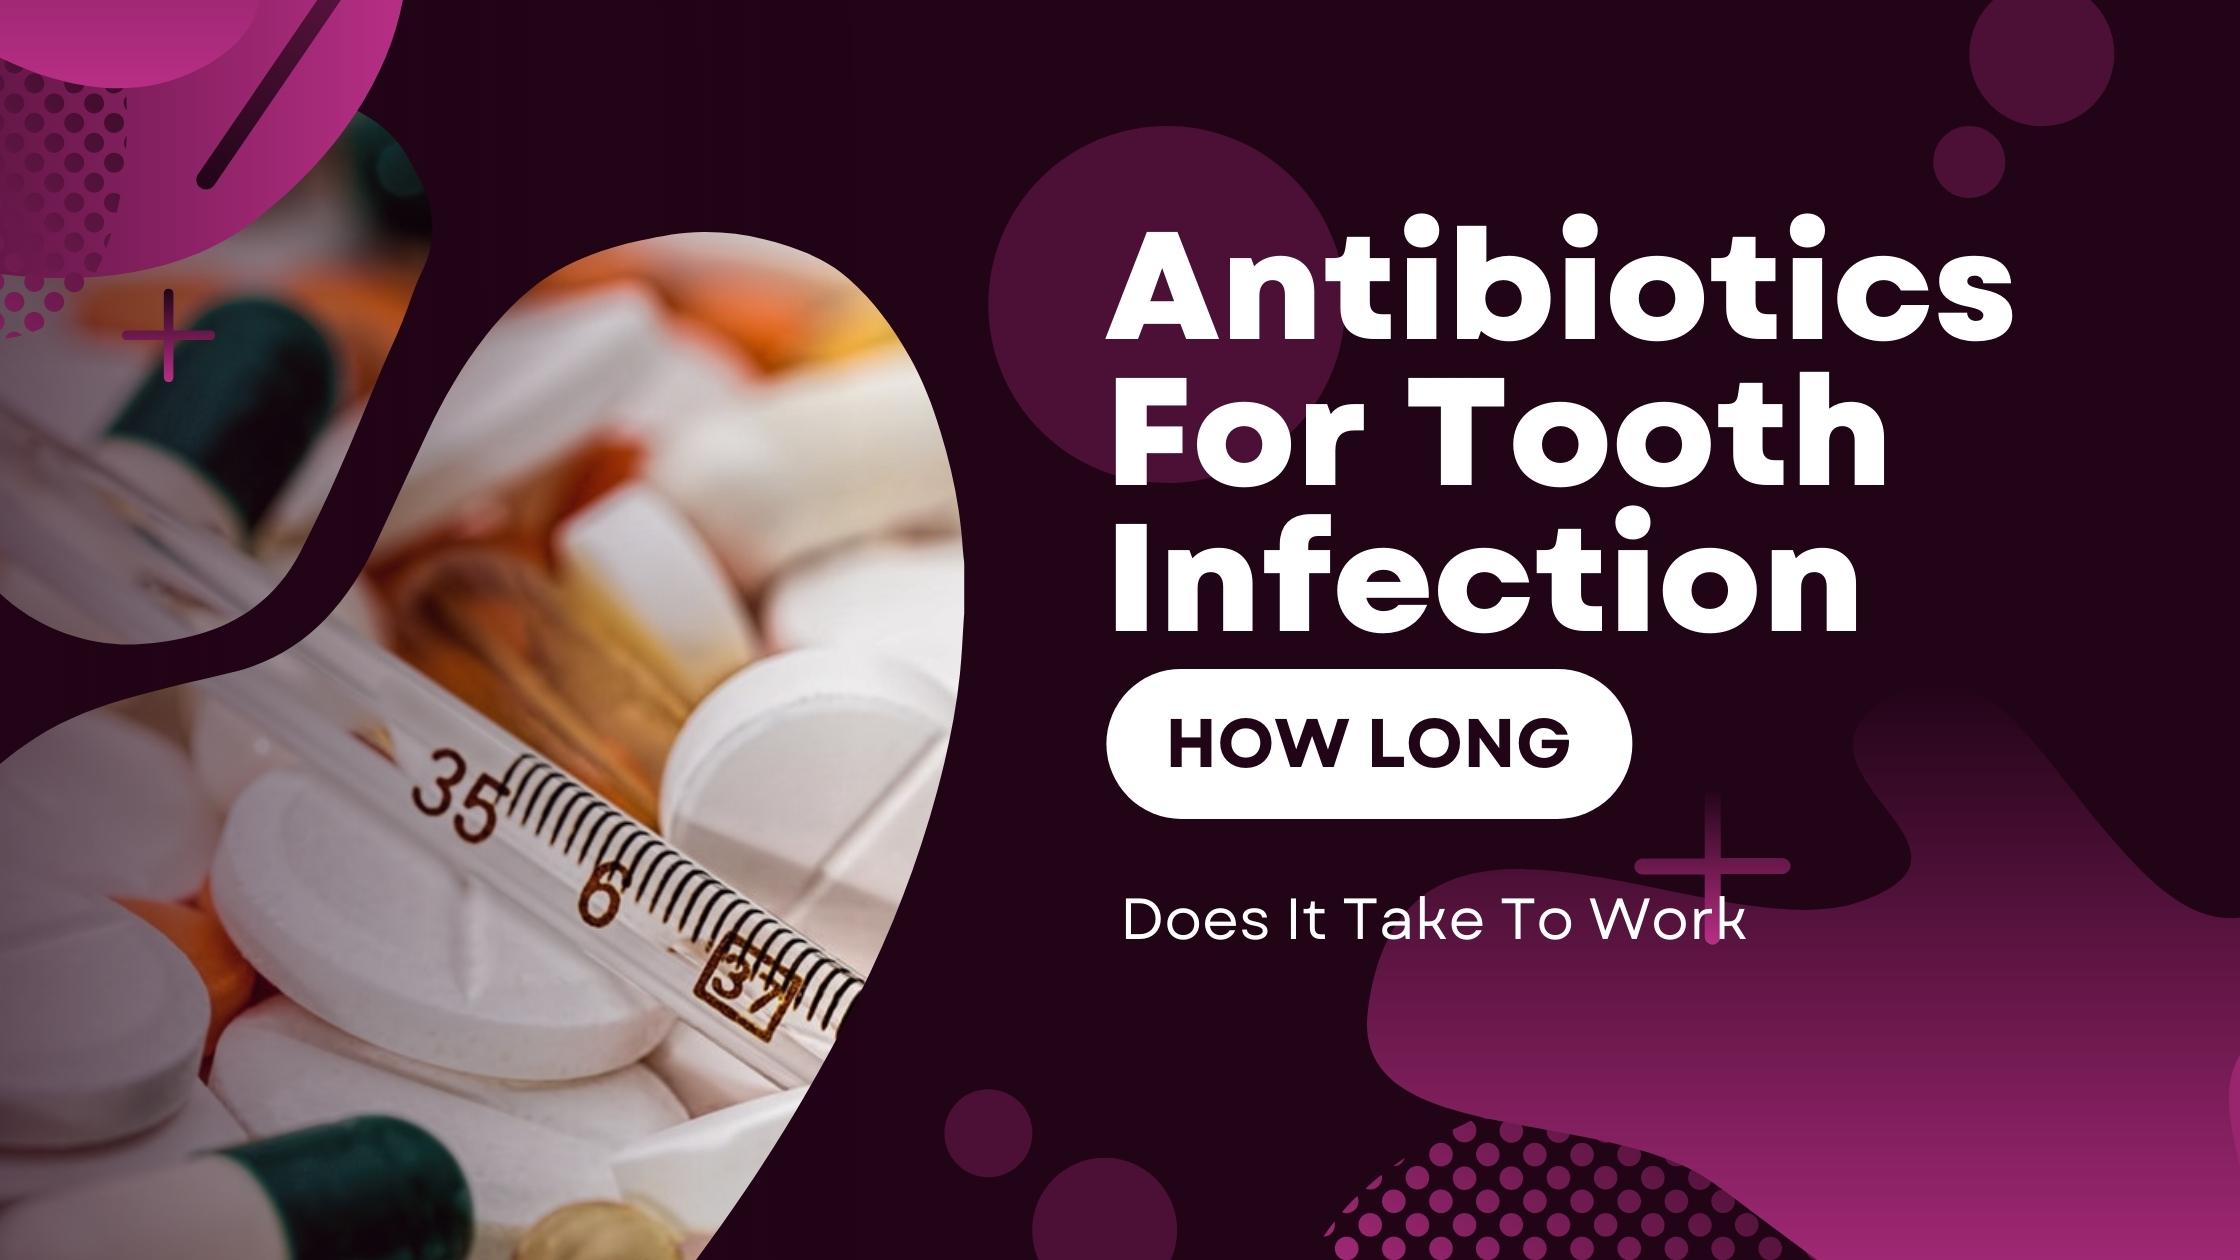 Antibiotics For Tooth Infection How Long Does It Take To Work